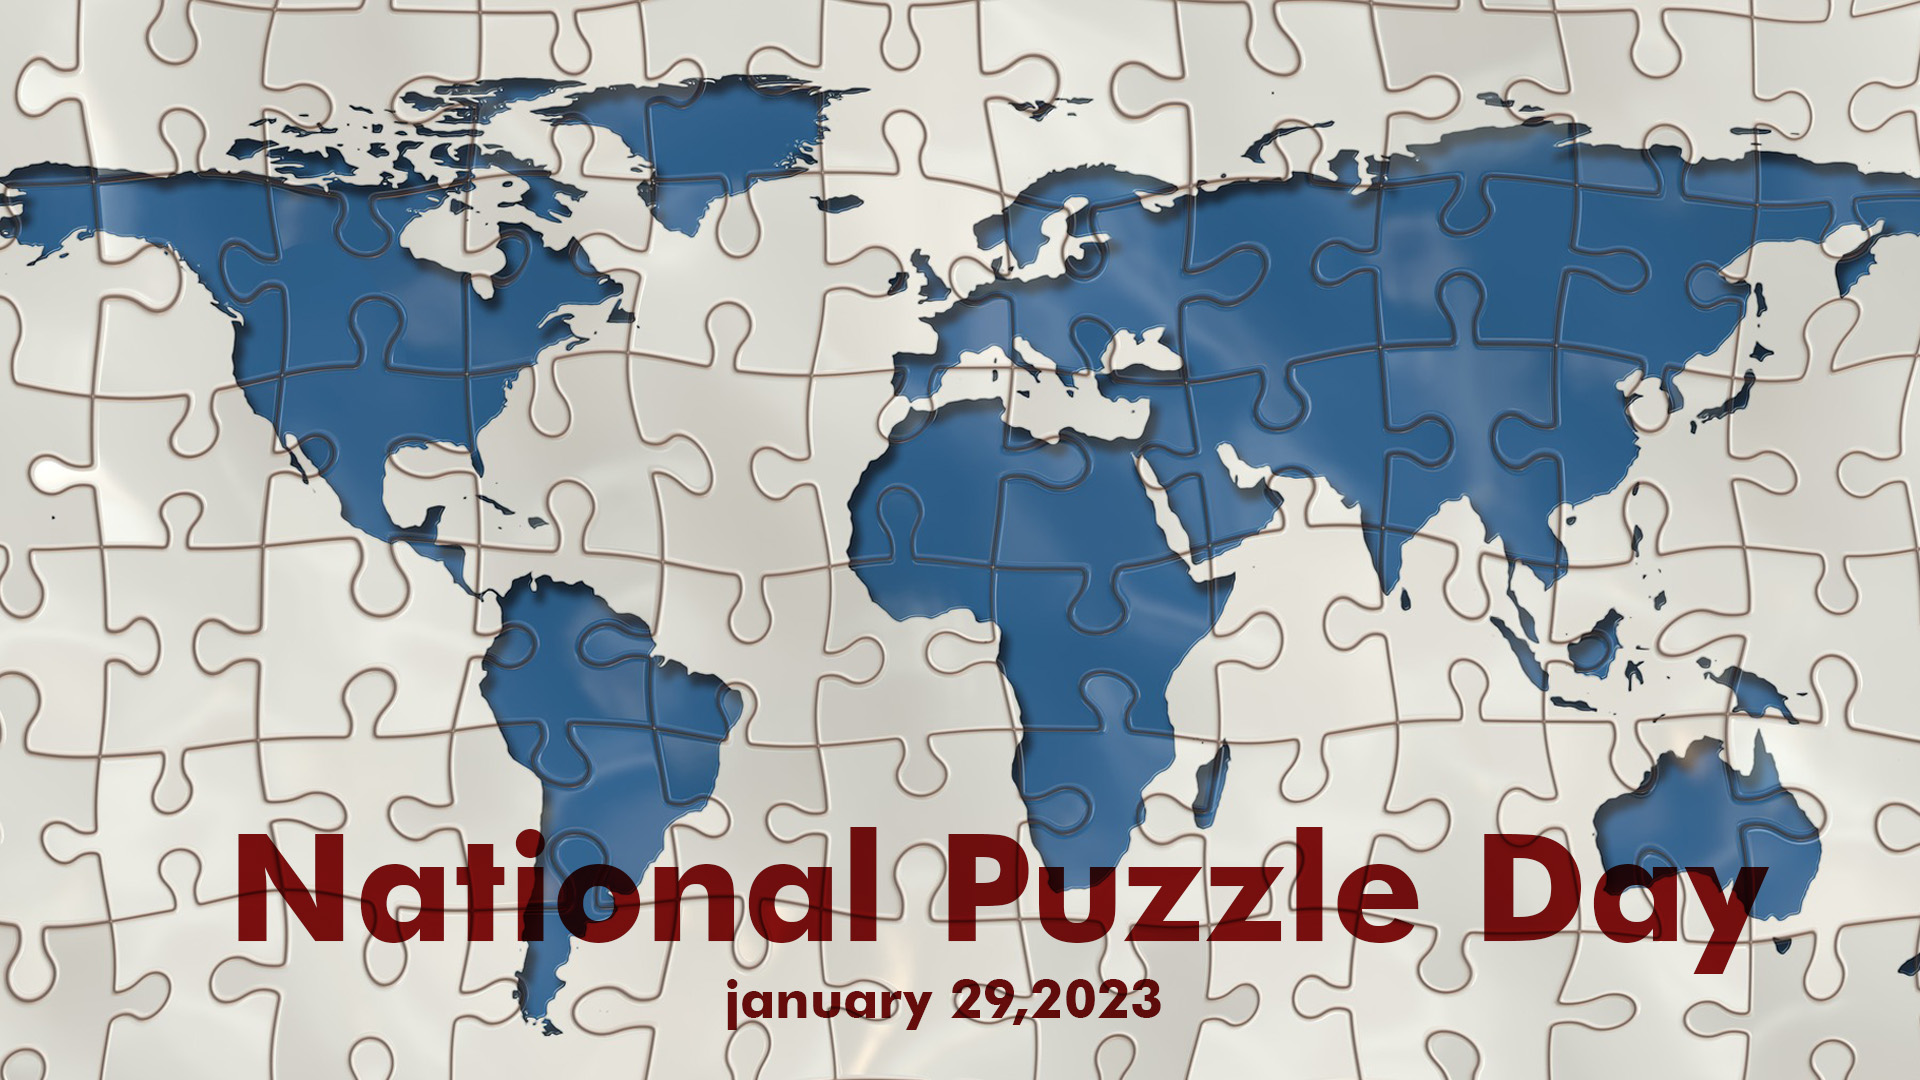 There is a animated puzzle of the world. The background id white and the countries are blue. National Puzzle Day January 29, 2023 is read across the bottom middle of the graphic in a deep red font.